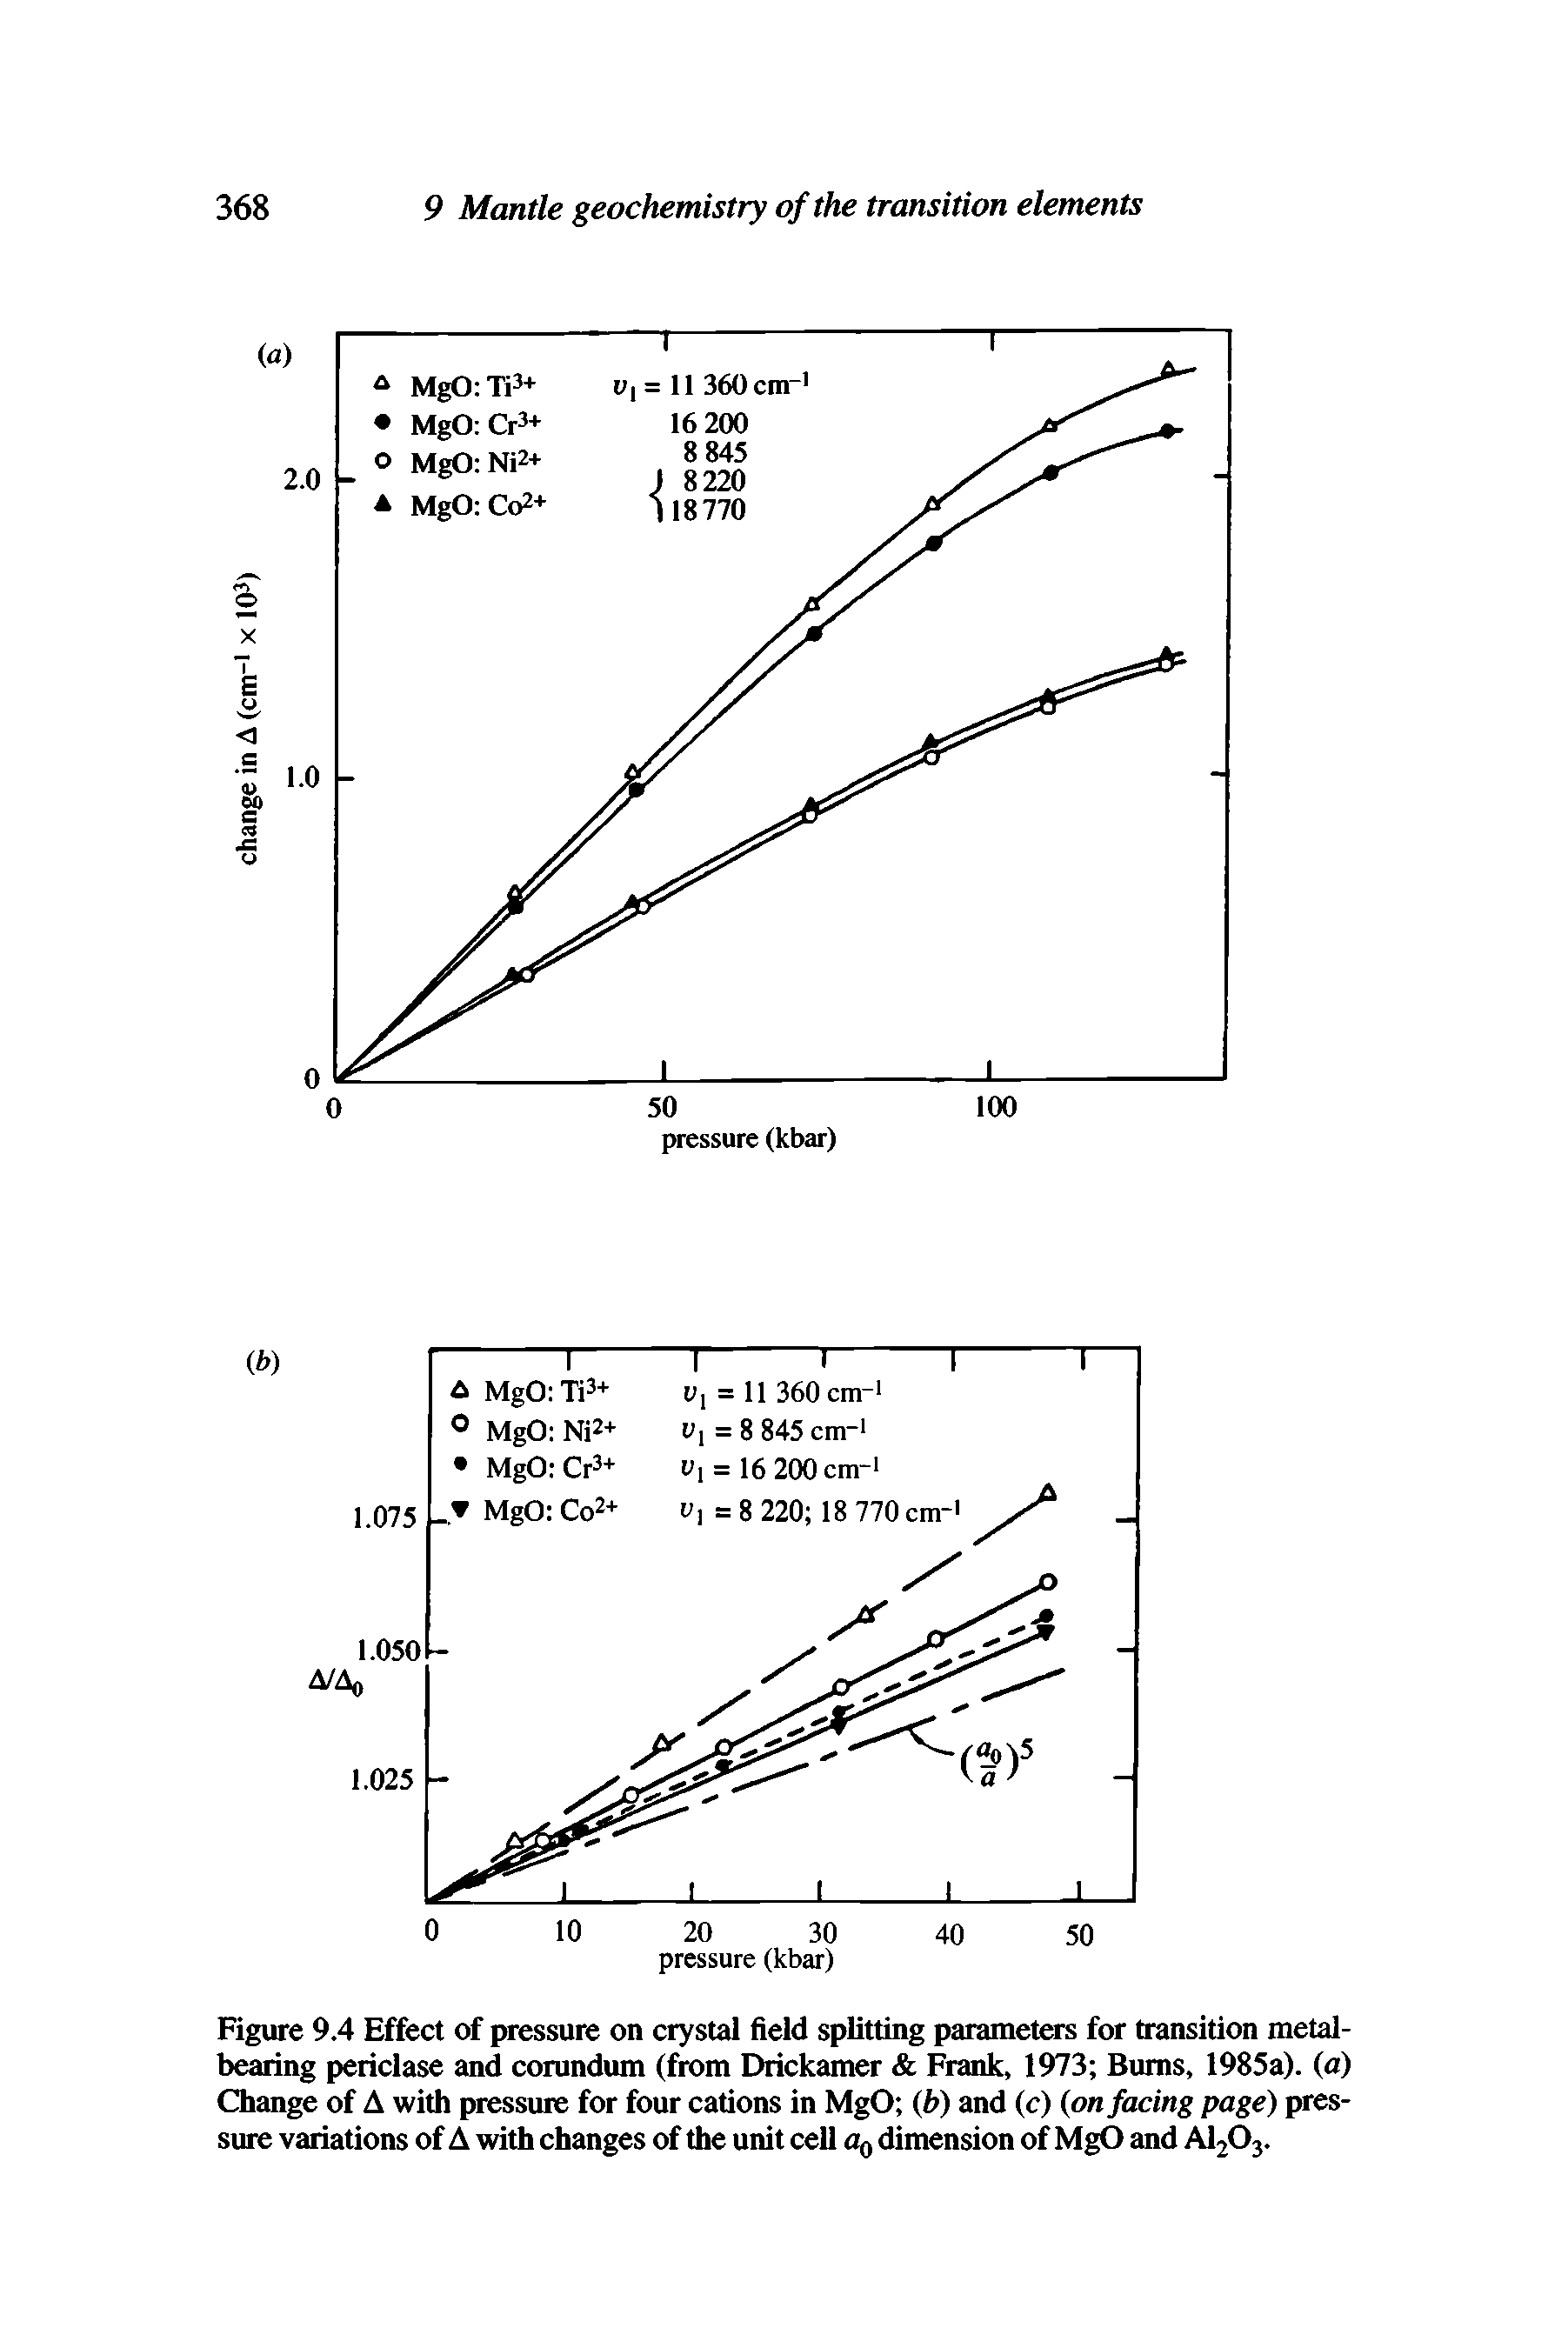 Figure 9.4 Effect of pressure on crystal field splitting parameters for transition metal-bearing periclase and corundum (from Drickamer Frank, 1973 Bums, 1985a). (a) Change of A with pressure for four cations in MgO (b) and (c) (on facing page) pressure variations of A with changes of the unit cell a0 dimension of MgO and A1203.